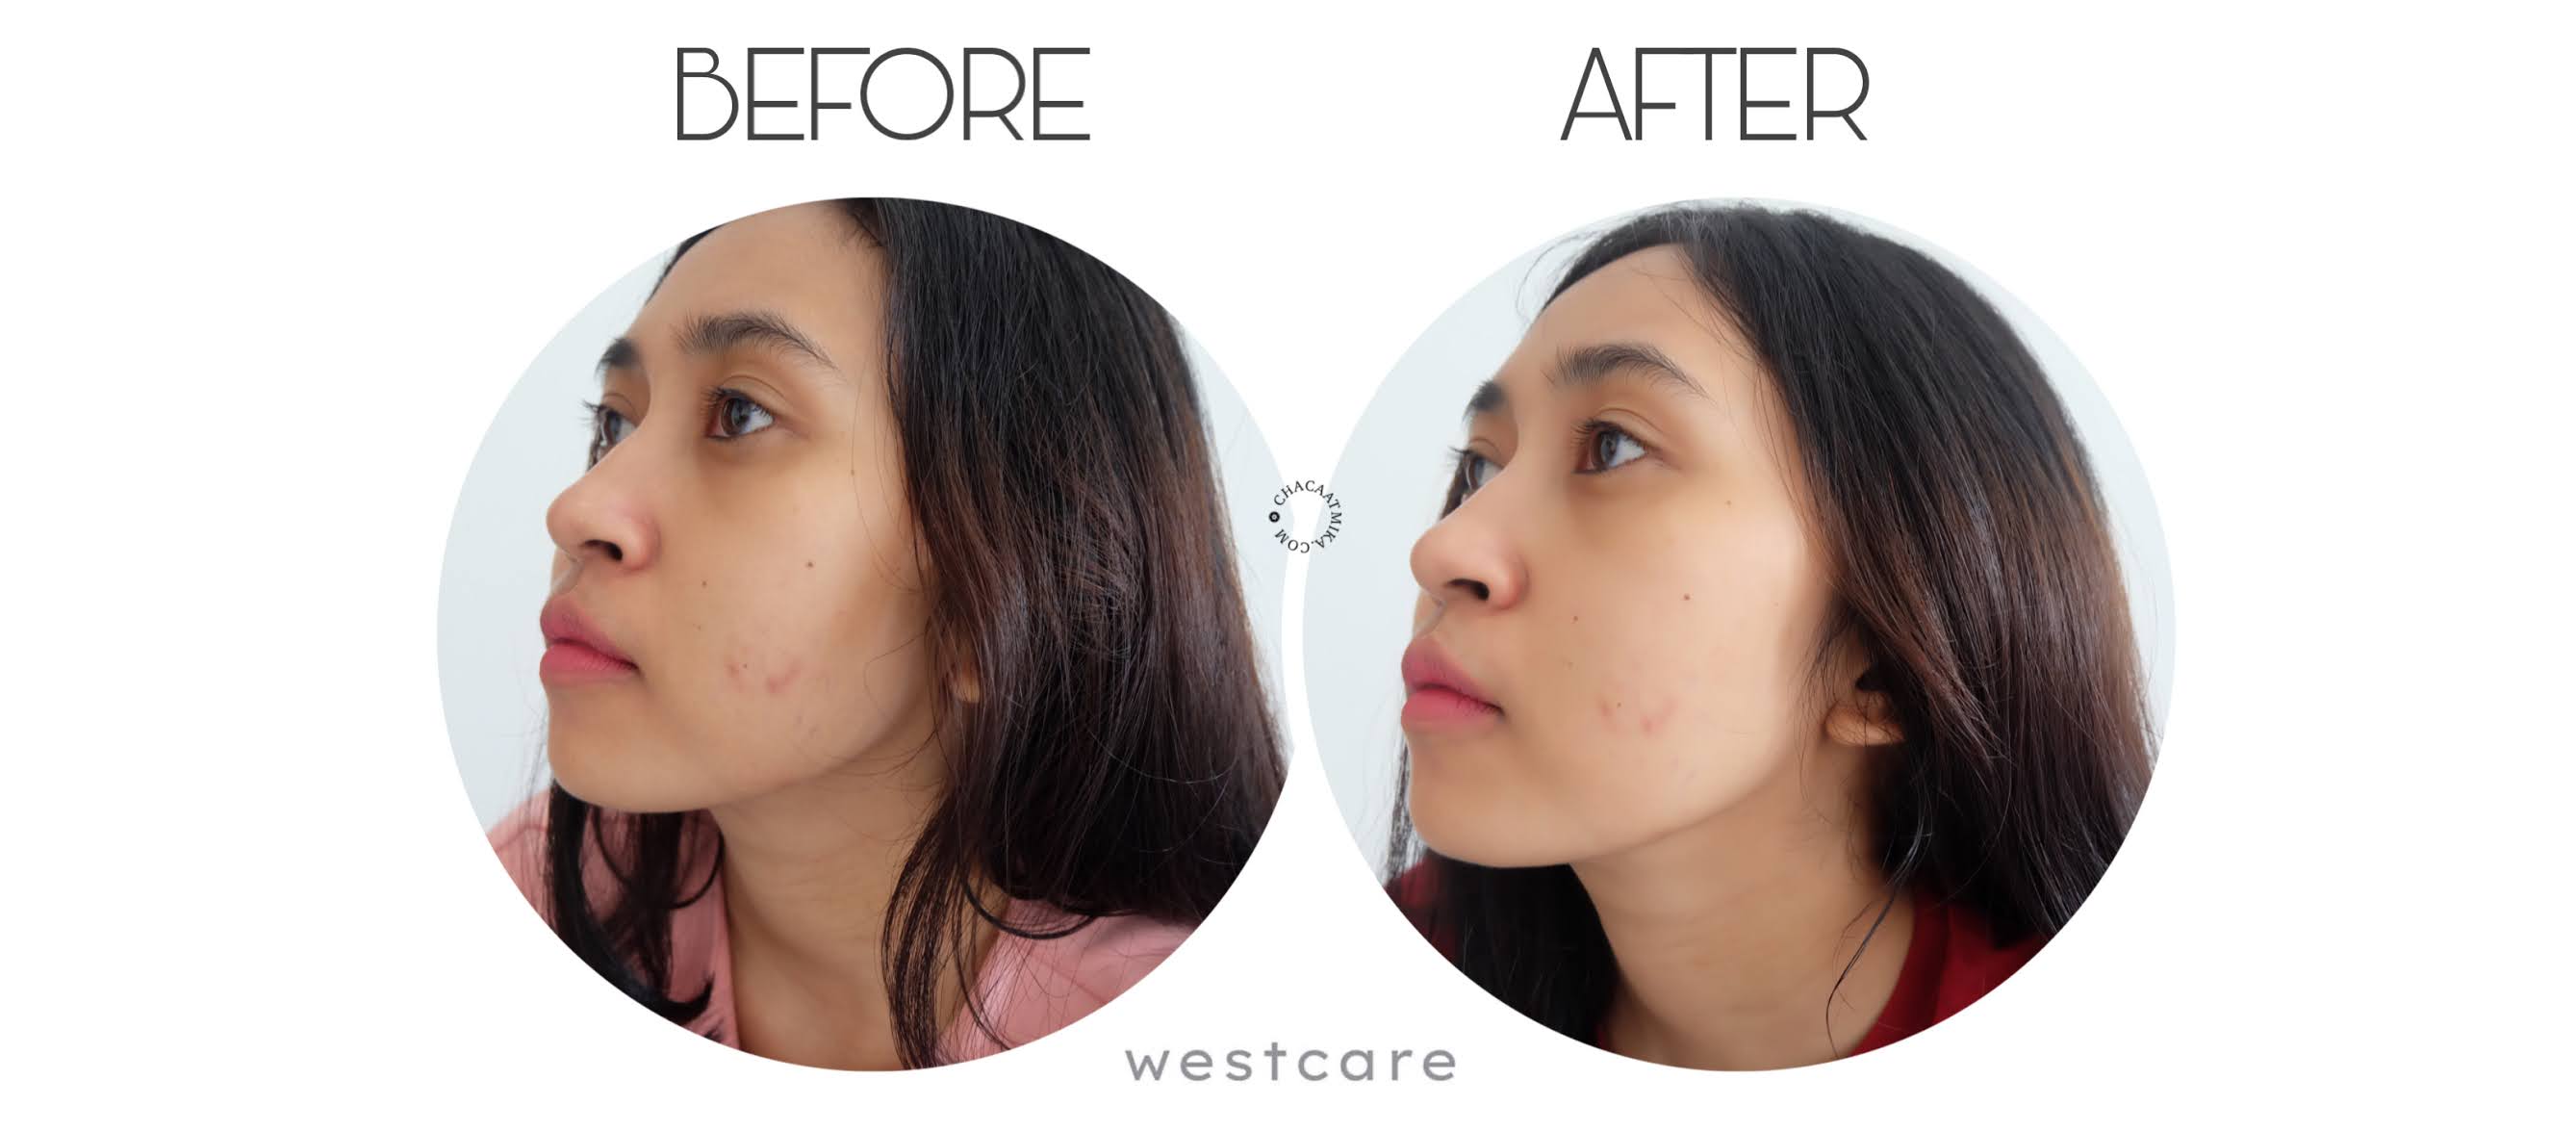 Before After Pemakaian Westcare Skincare